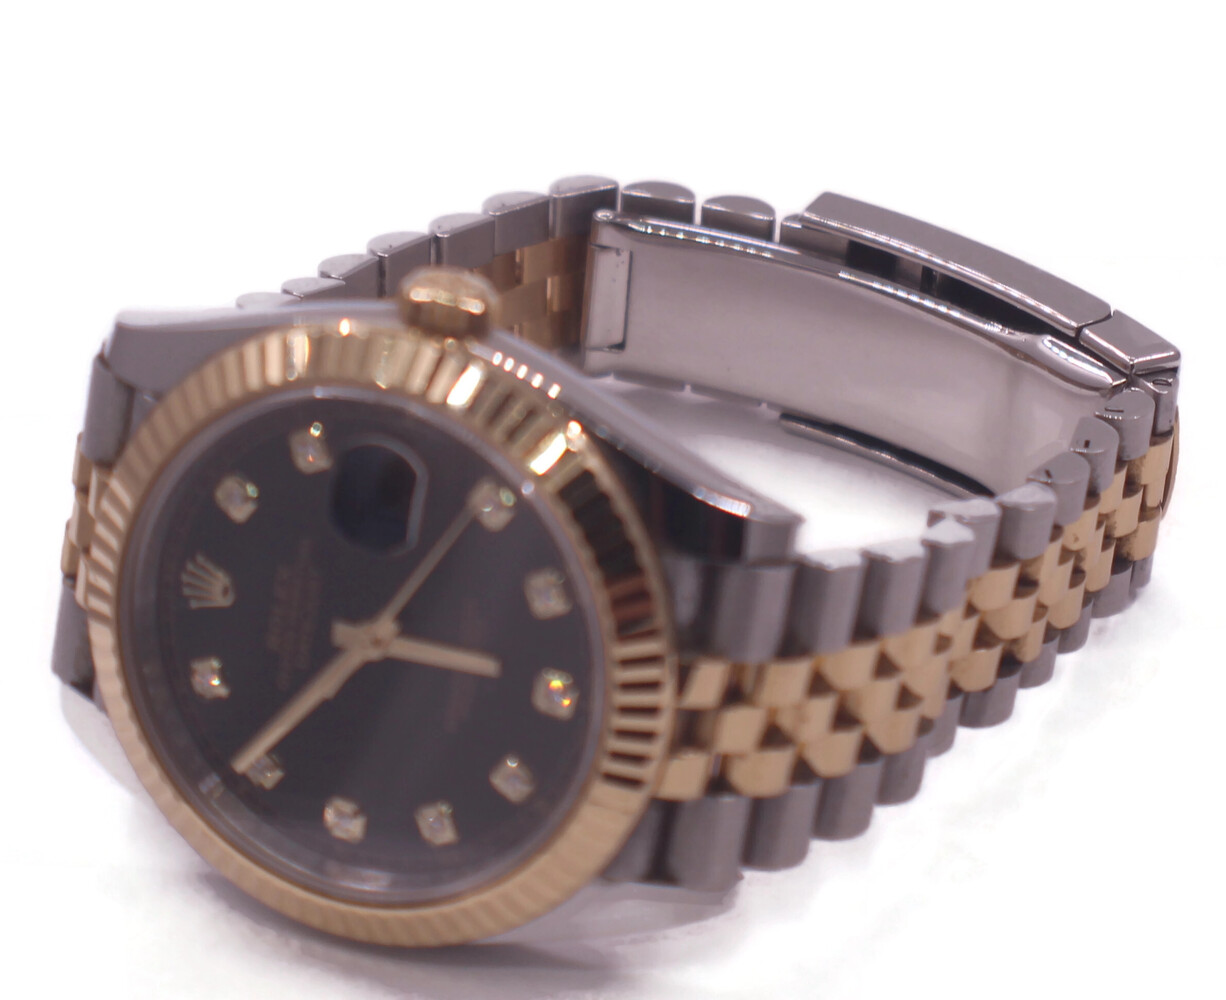 Rolex 126333 Datejust 41MM 18KT and Stainless Watch with Box and Papers 2021